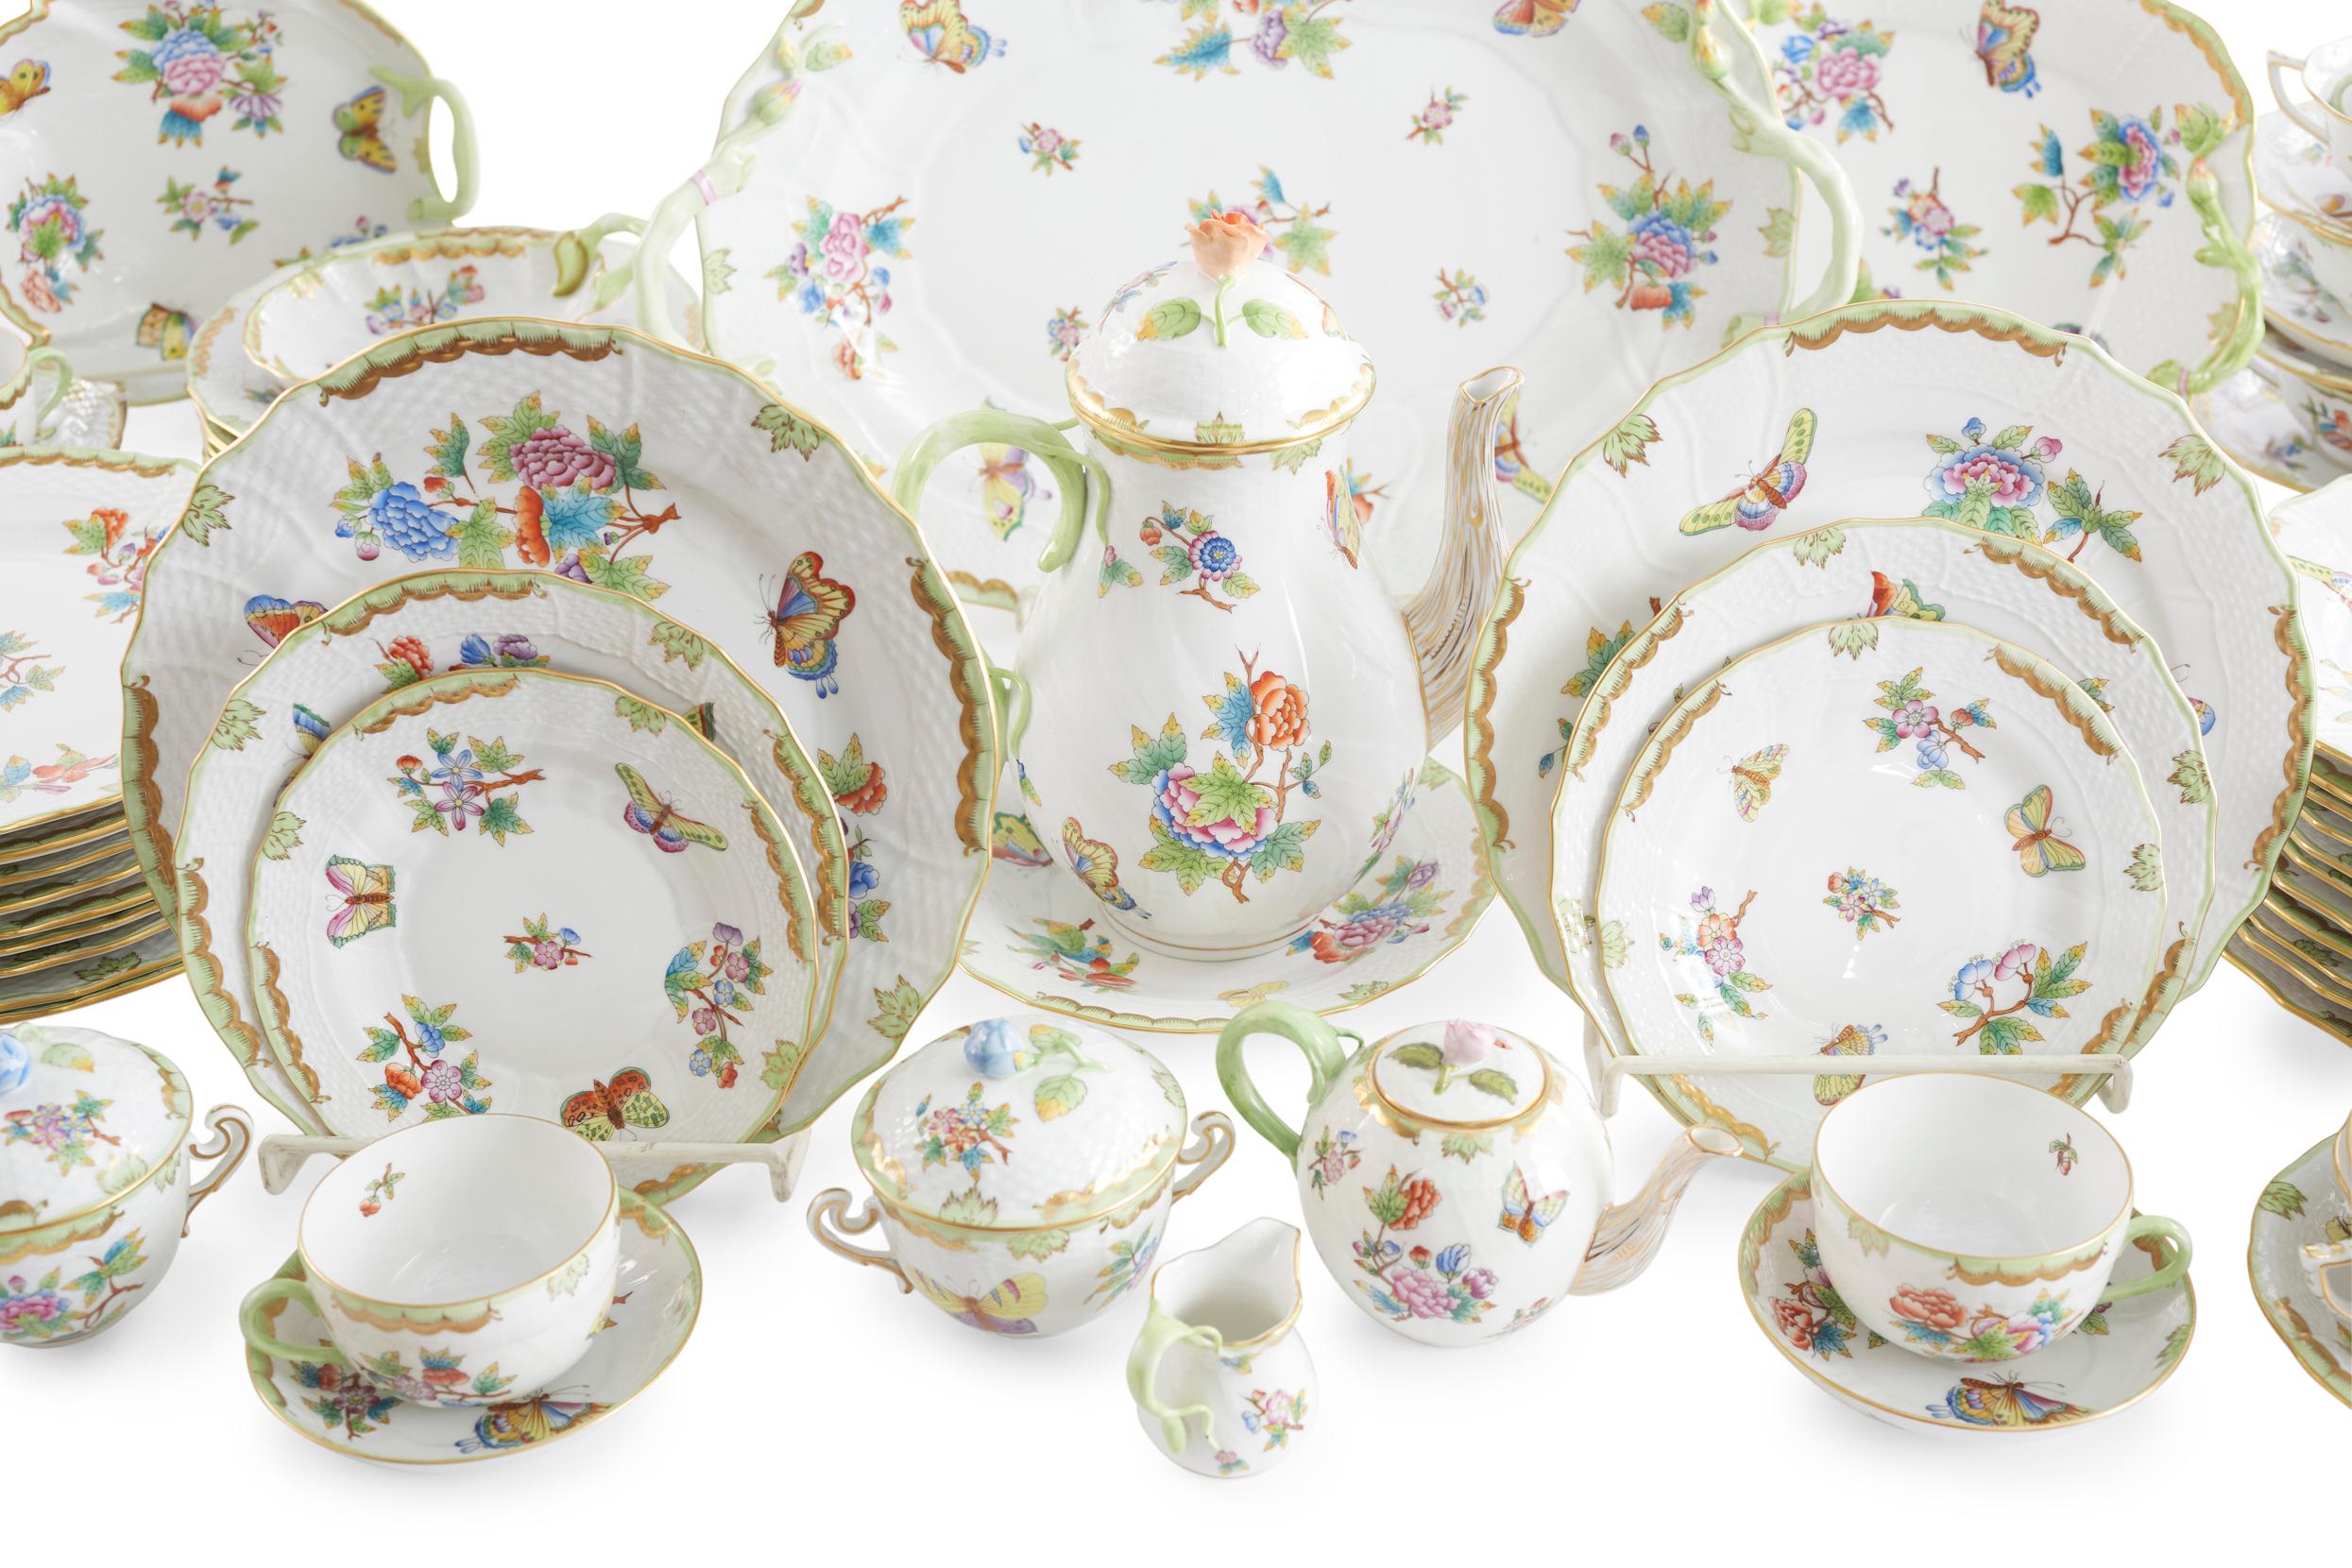 Herend porcelain dinnerware service for twelve people with serving pieces. Each piece is beautifully painted with butterflies and flowers with gilt gold trim details. Each piece is in great condition. Service is barely used, minor wear. Maker's mark